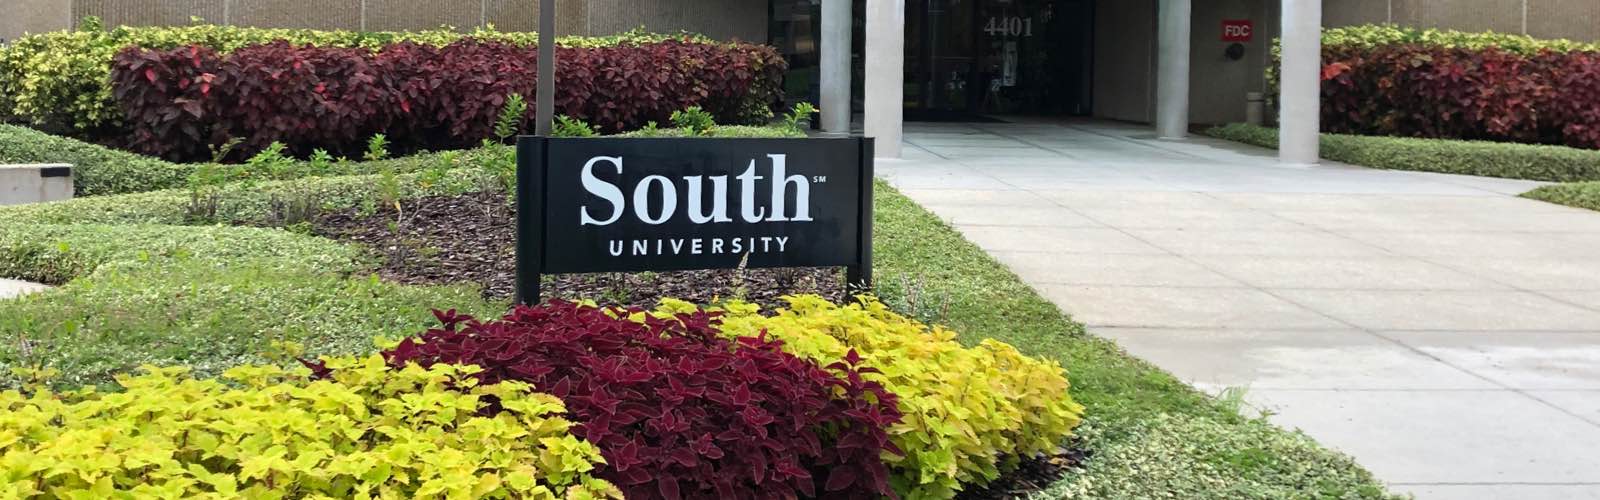 South University sign in front of building